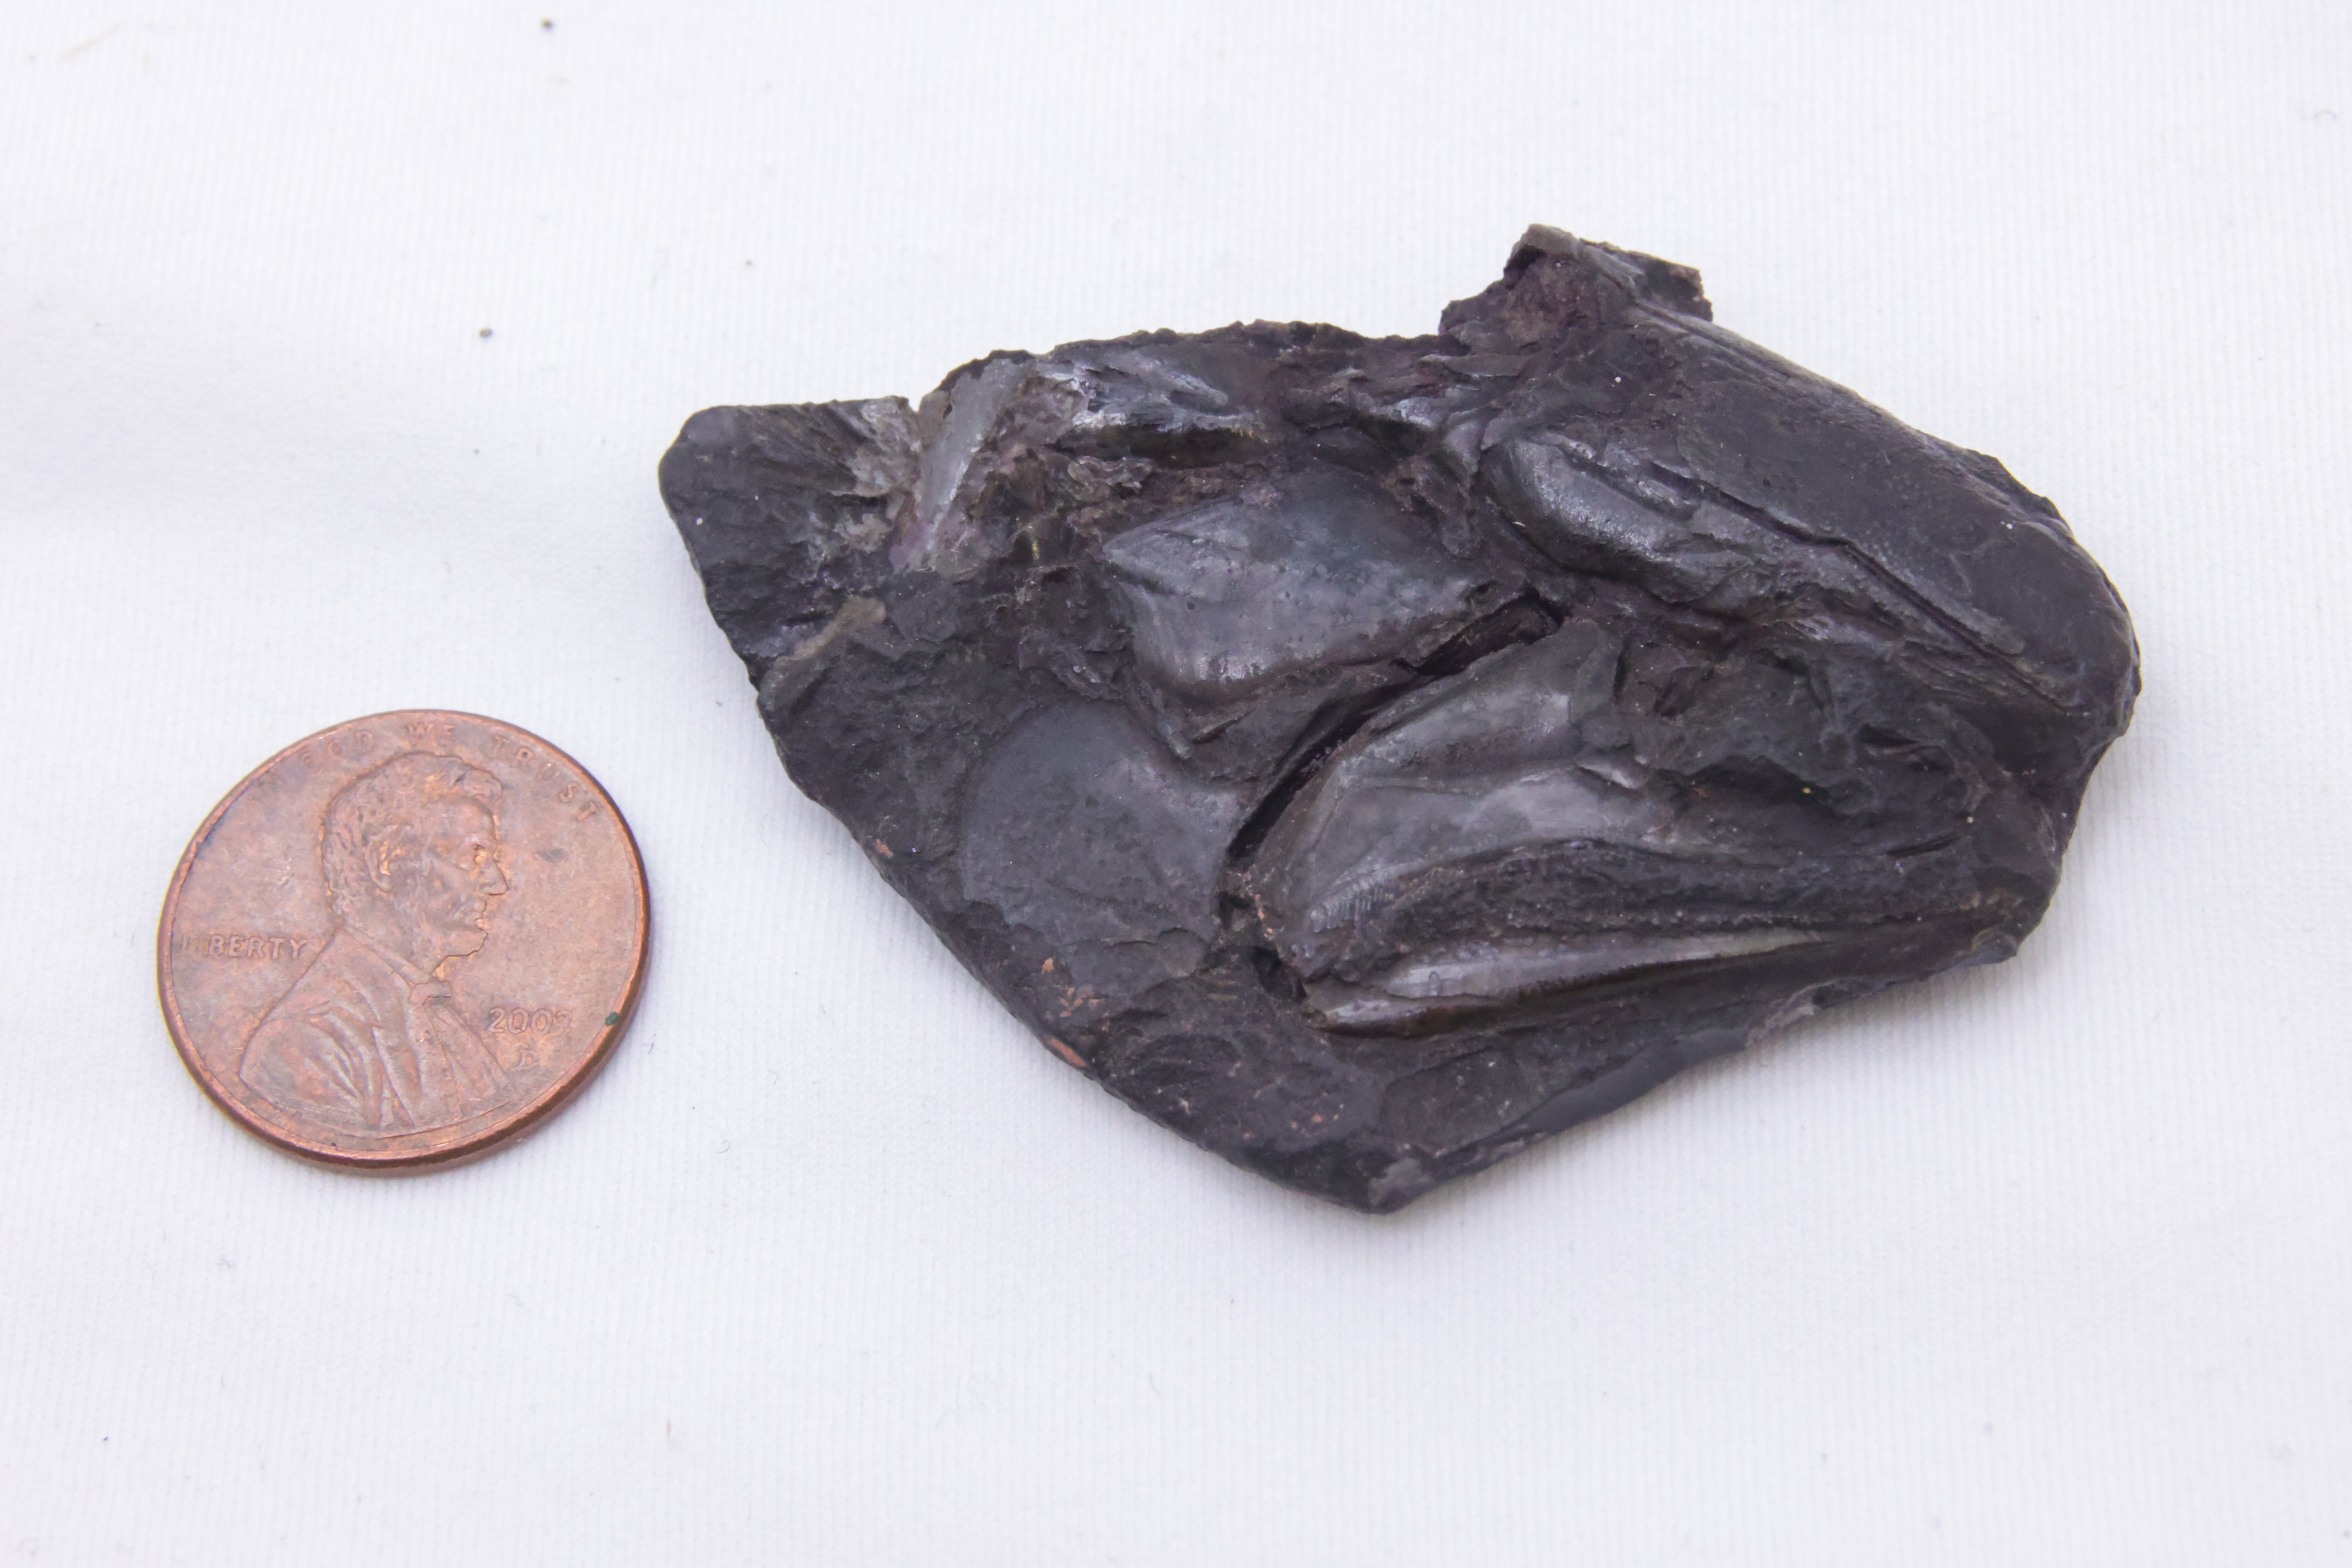 fossilized skull of Coccocephalus wildi, next to penny for comparison